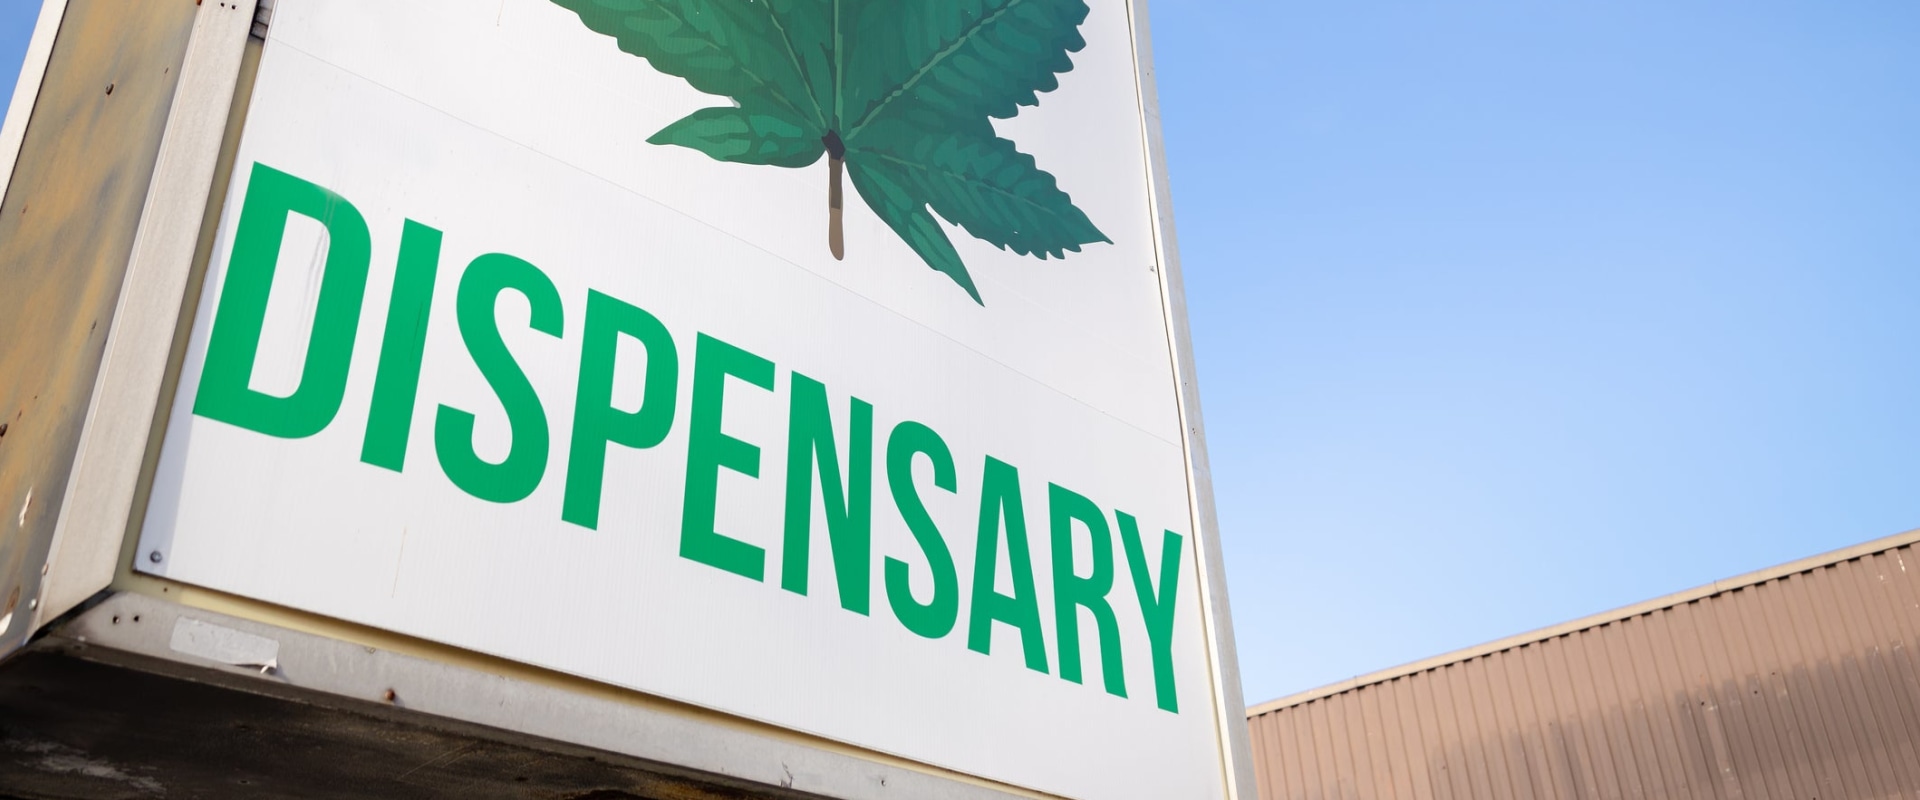 Where are dispensaries legal?